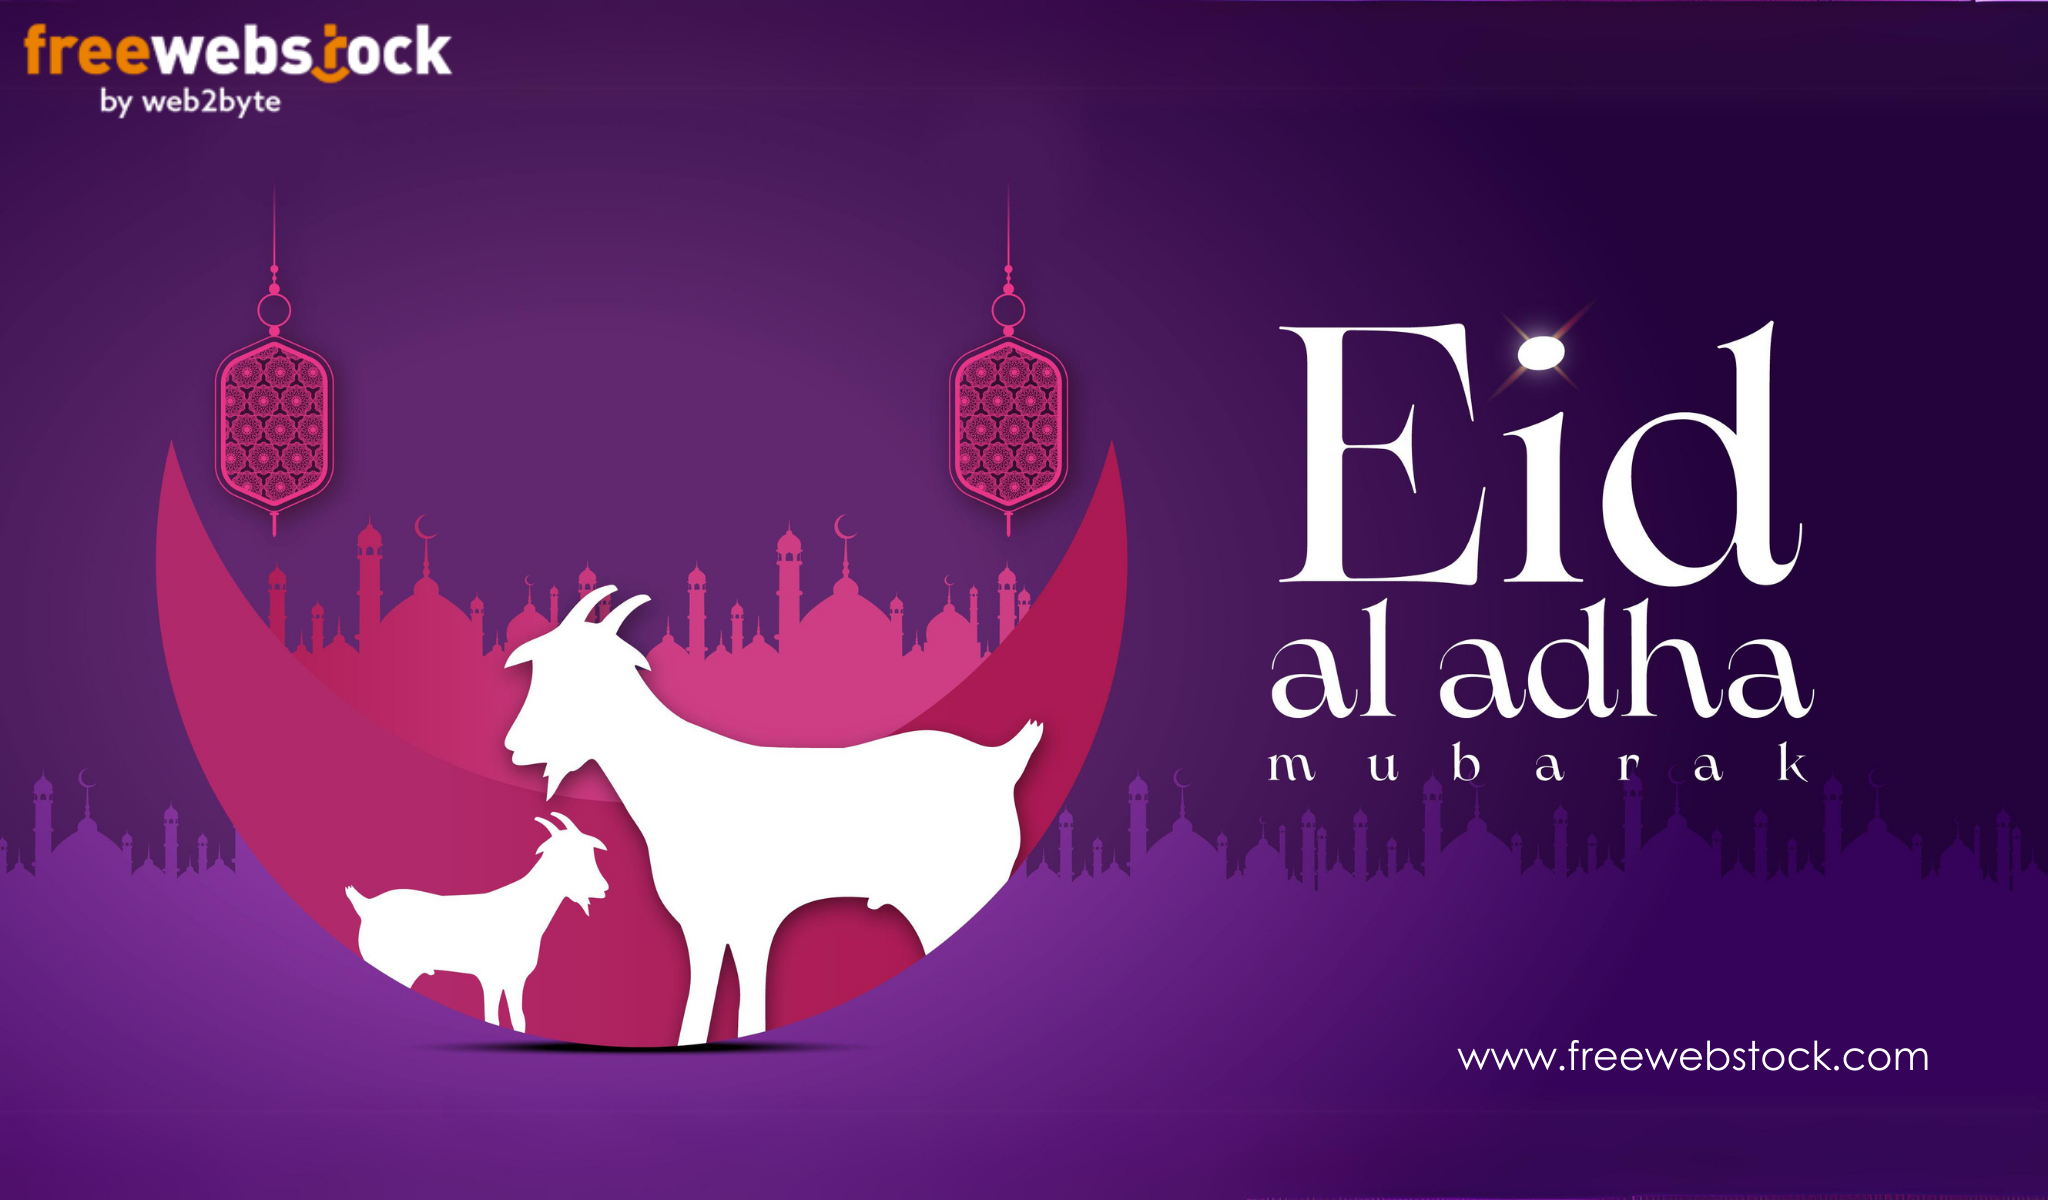 Download High-Quality Eid ul-Adha Images and Spread Joy!